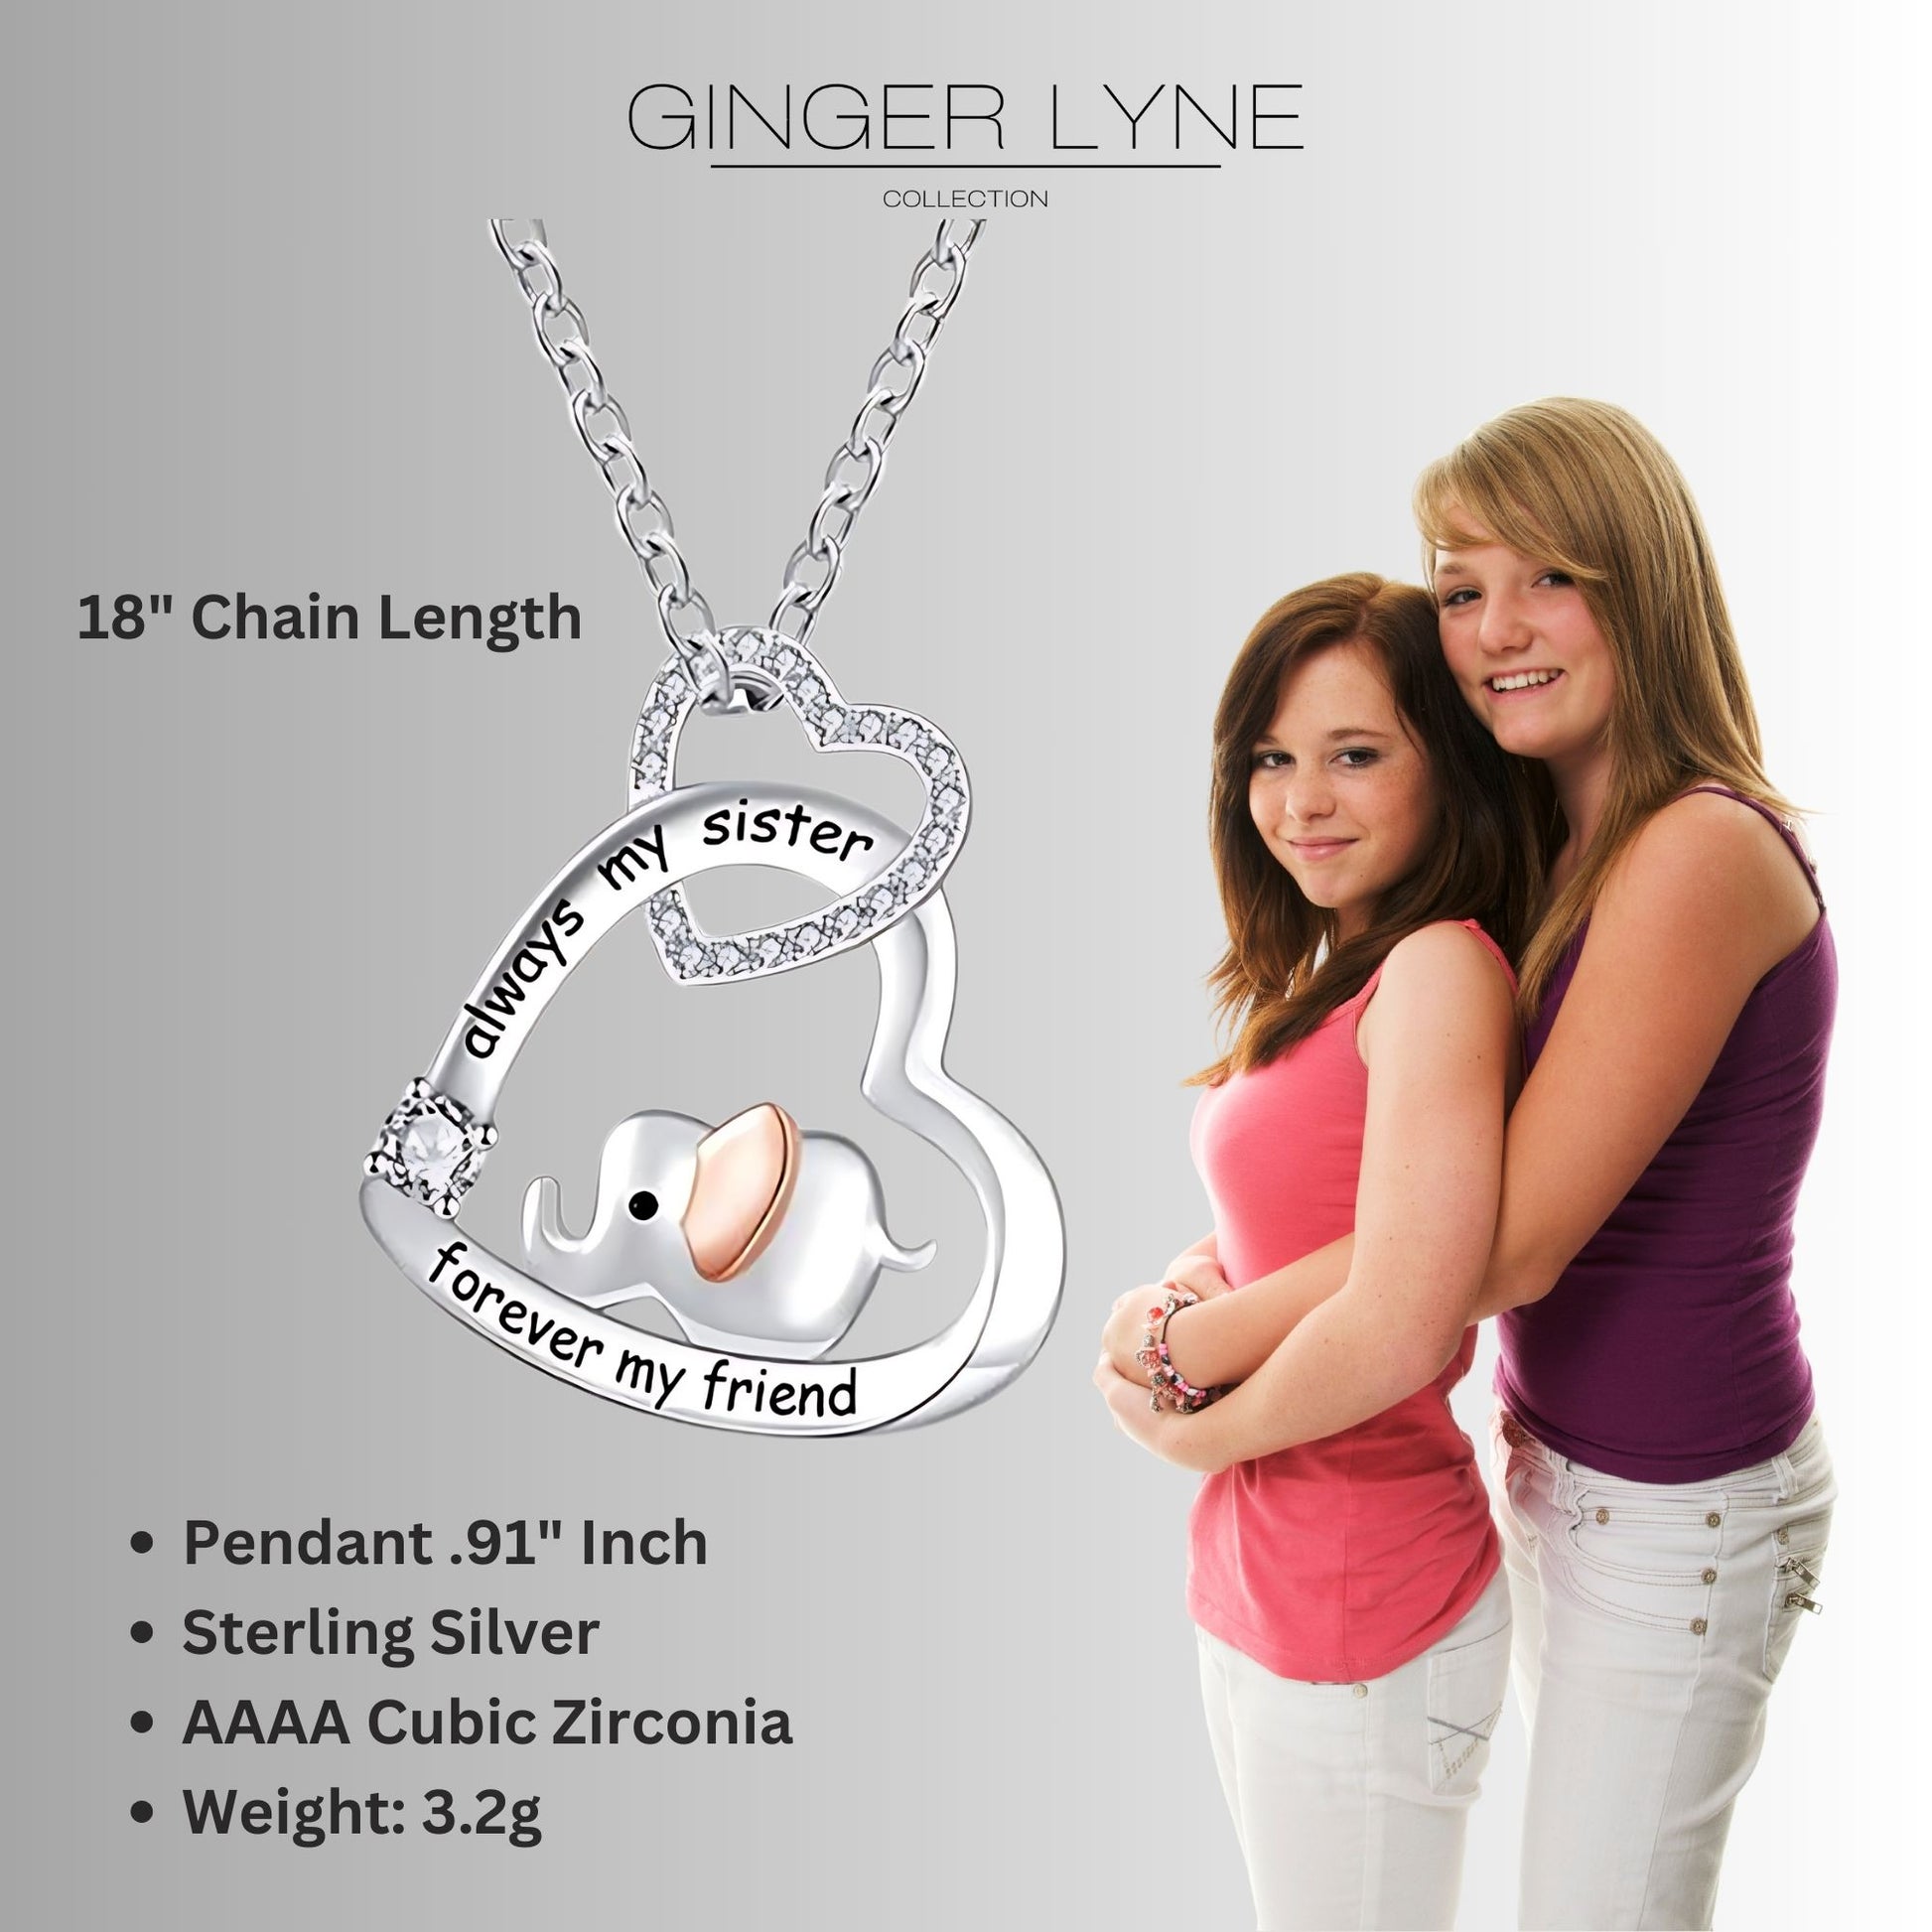 Sister Elephant Heart Pendant Necklace for Women Ginger Lyne Collection Sterling Silver CZ